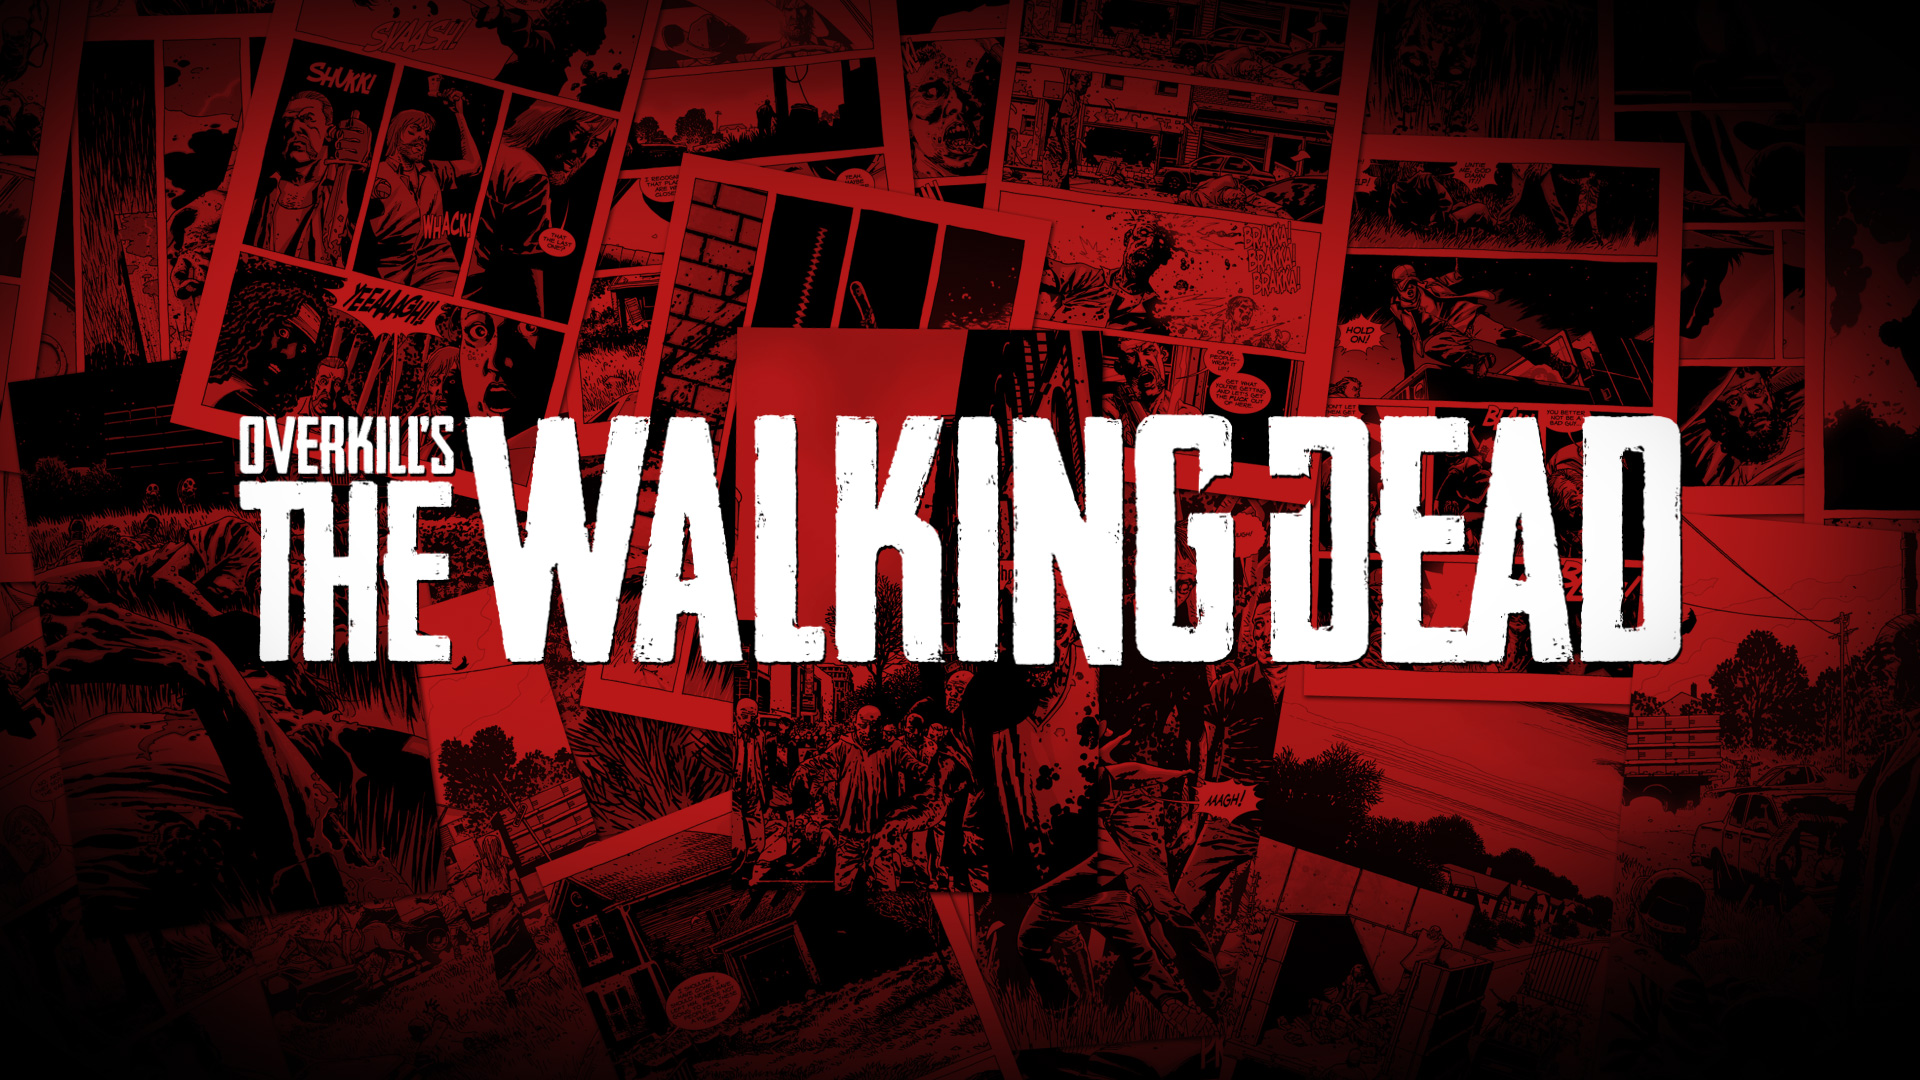 The Walking Dead Co-op Game ‘Fans Have Been Waiting For’ Coming 2016